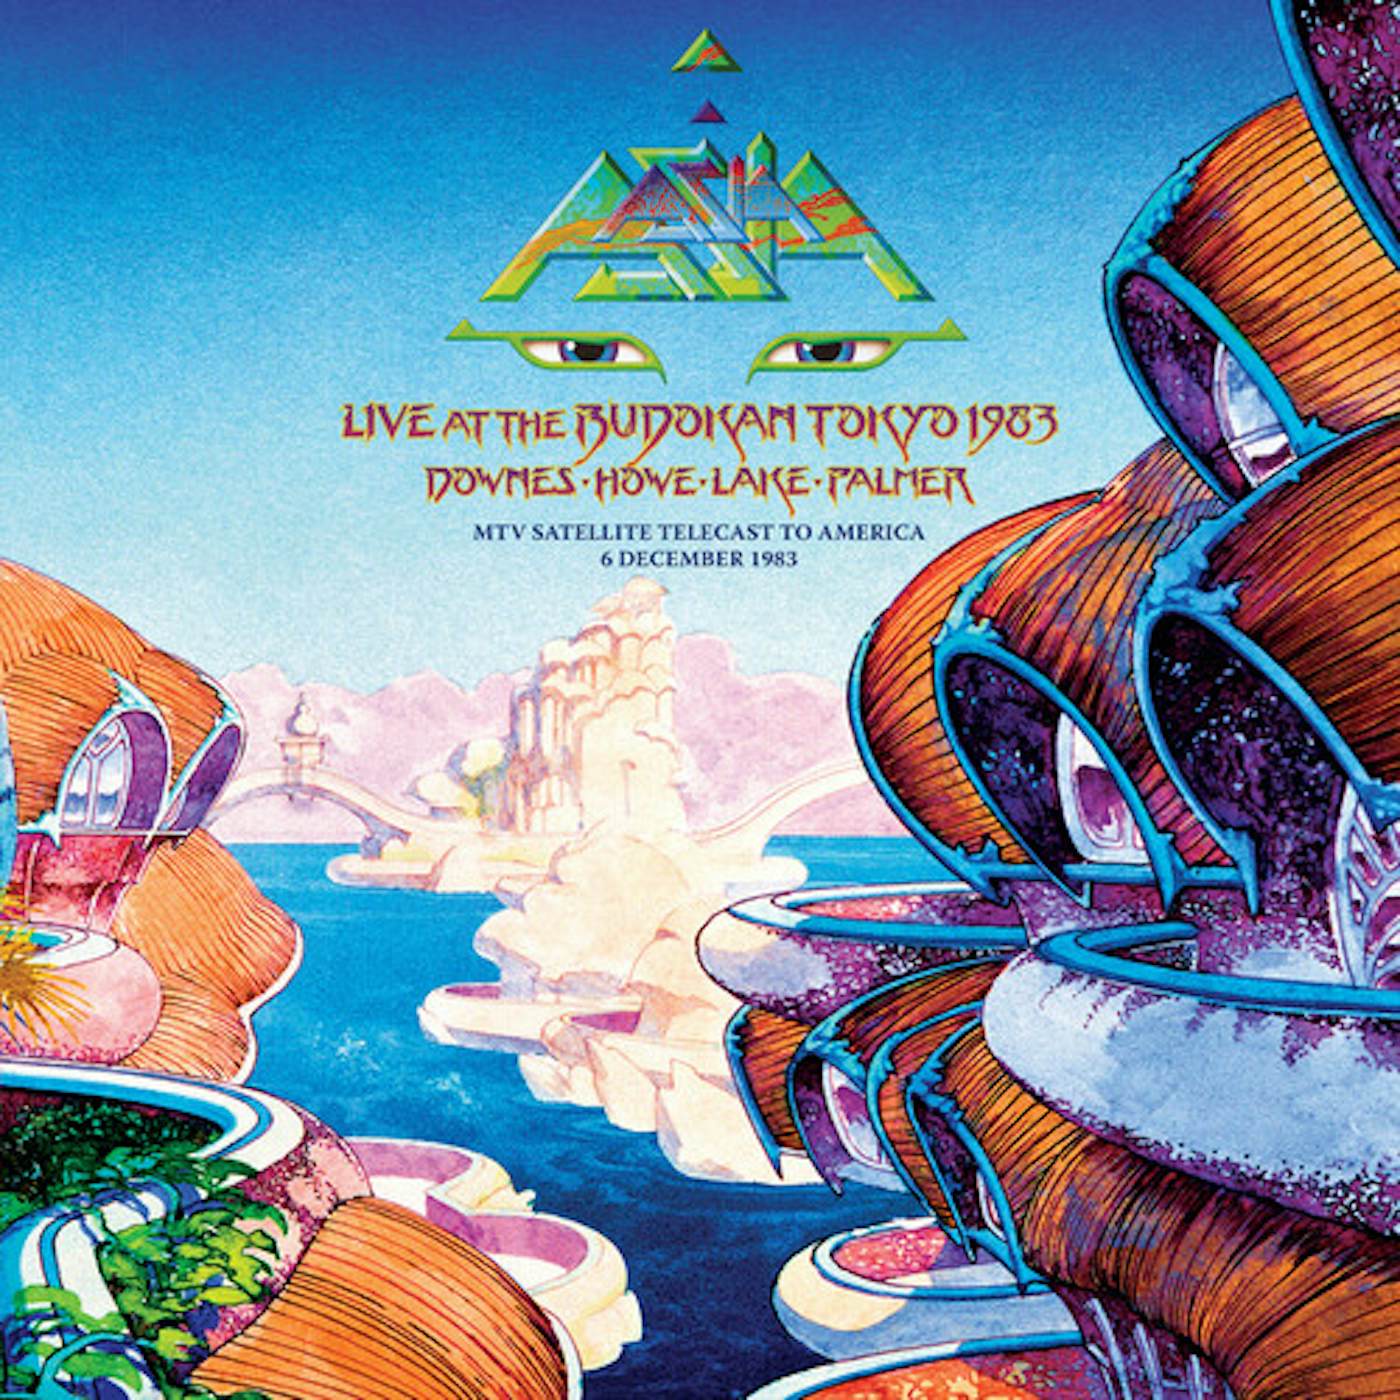 ASIA IN ASIA - LIVE AT THE BUDOKAN TOKYO 1983 CD